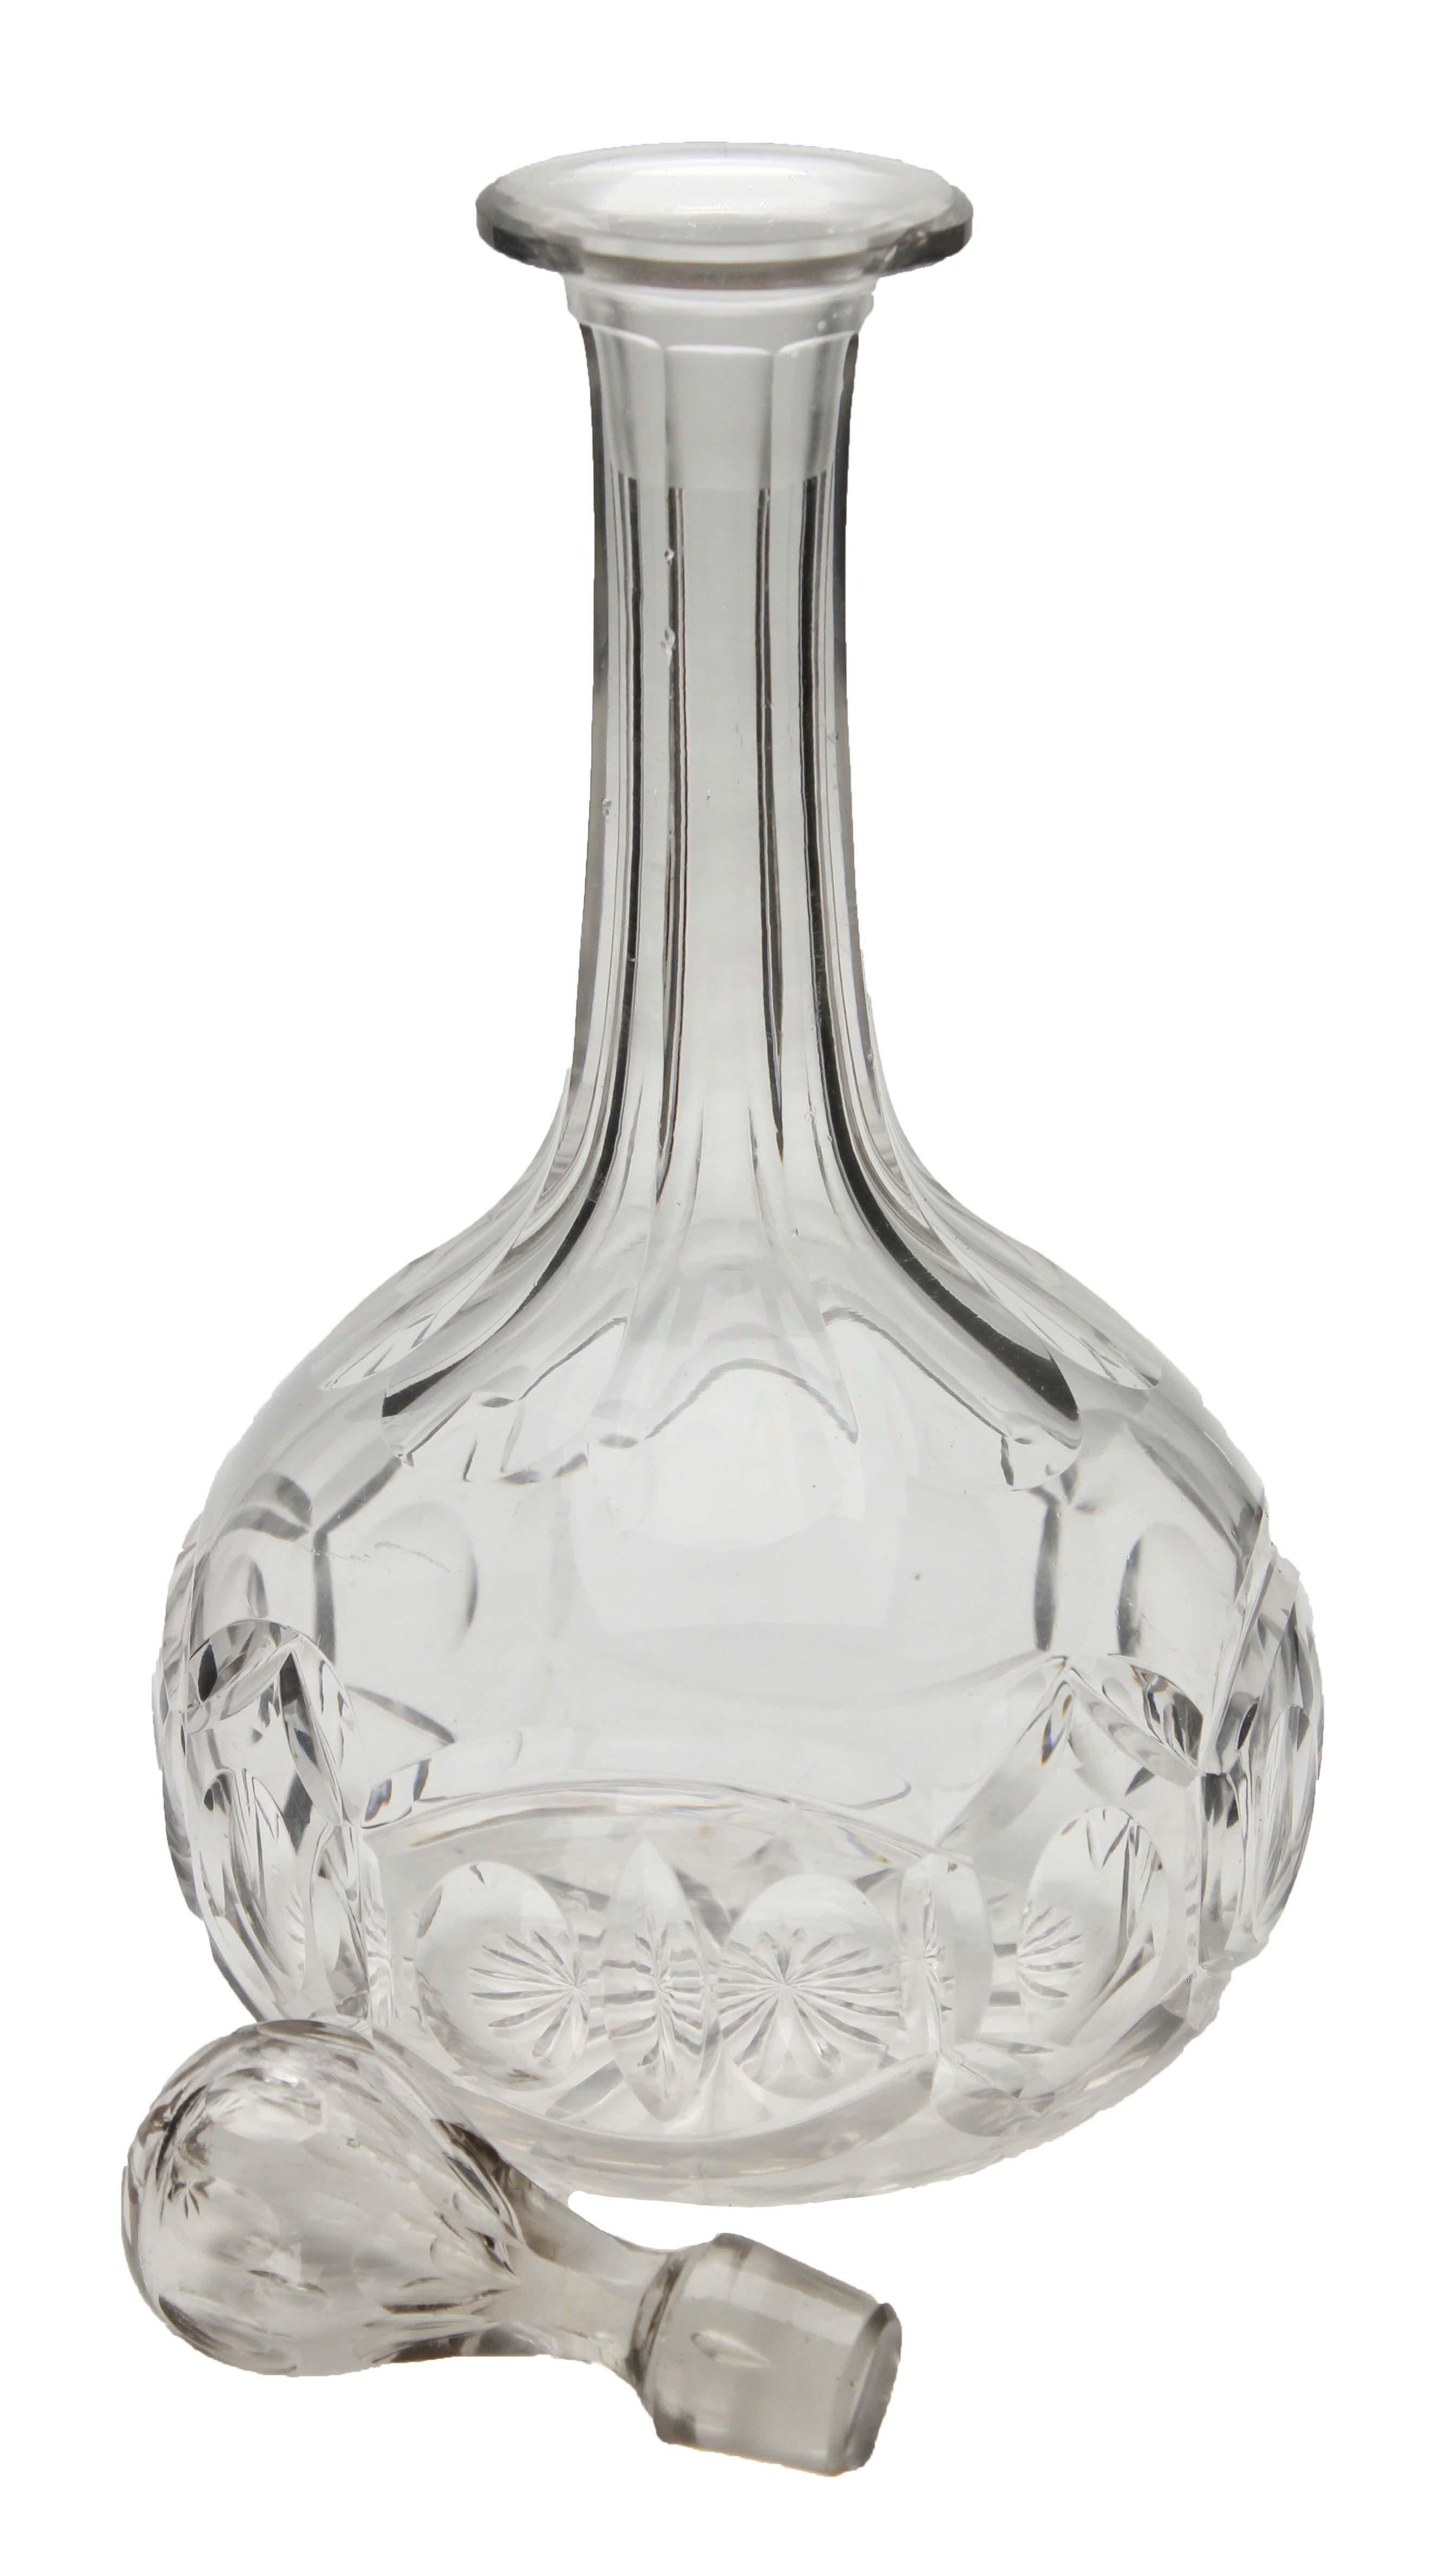 Val Saint Lambert cut-crystal decanter, 20th century
looks simply stunning.
Val Saint Lambert is a Belgian crystal glassware manufacturer, founded in 1826 and based in Seraing. It is the official glassware supplier to King Albert II. A tall cut